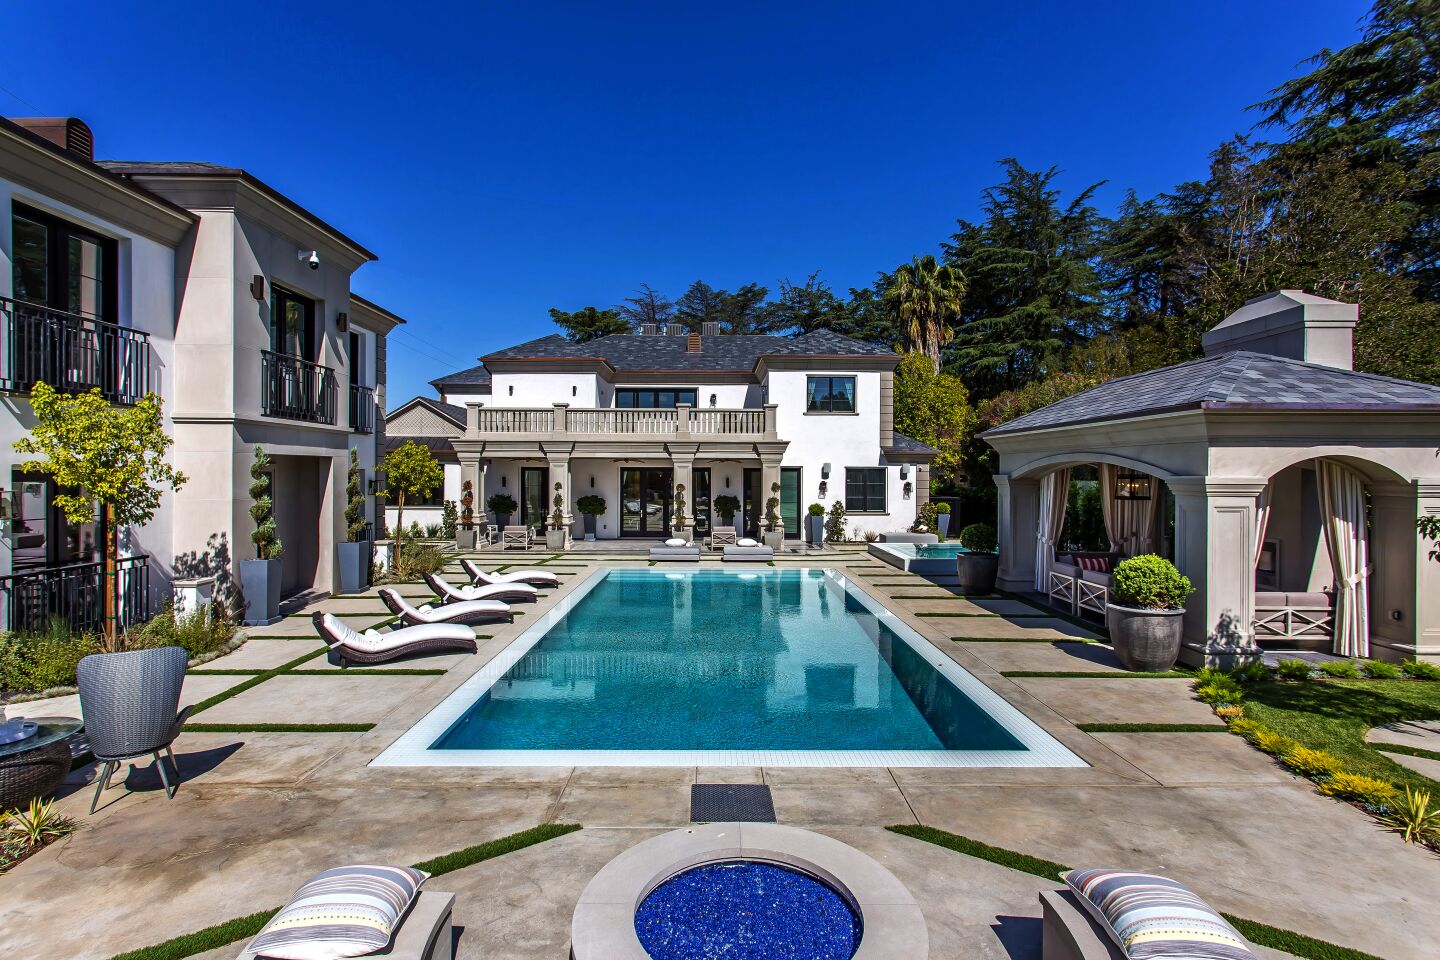 Grammy-winning producer Philip Lawrence shelled out $10.55 million for the Encino home of former Dodger Jimmy Rollins.